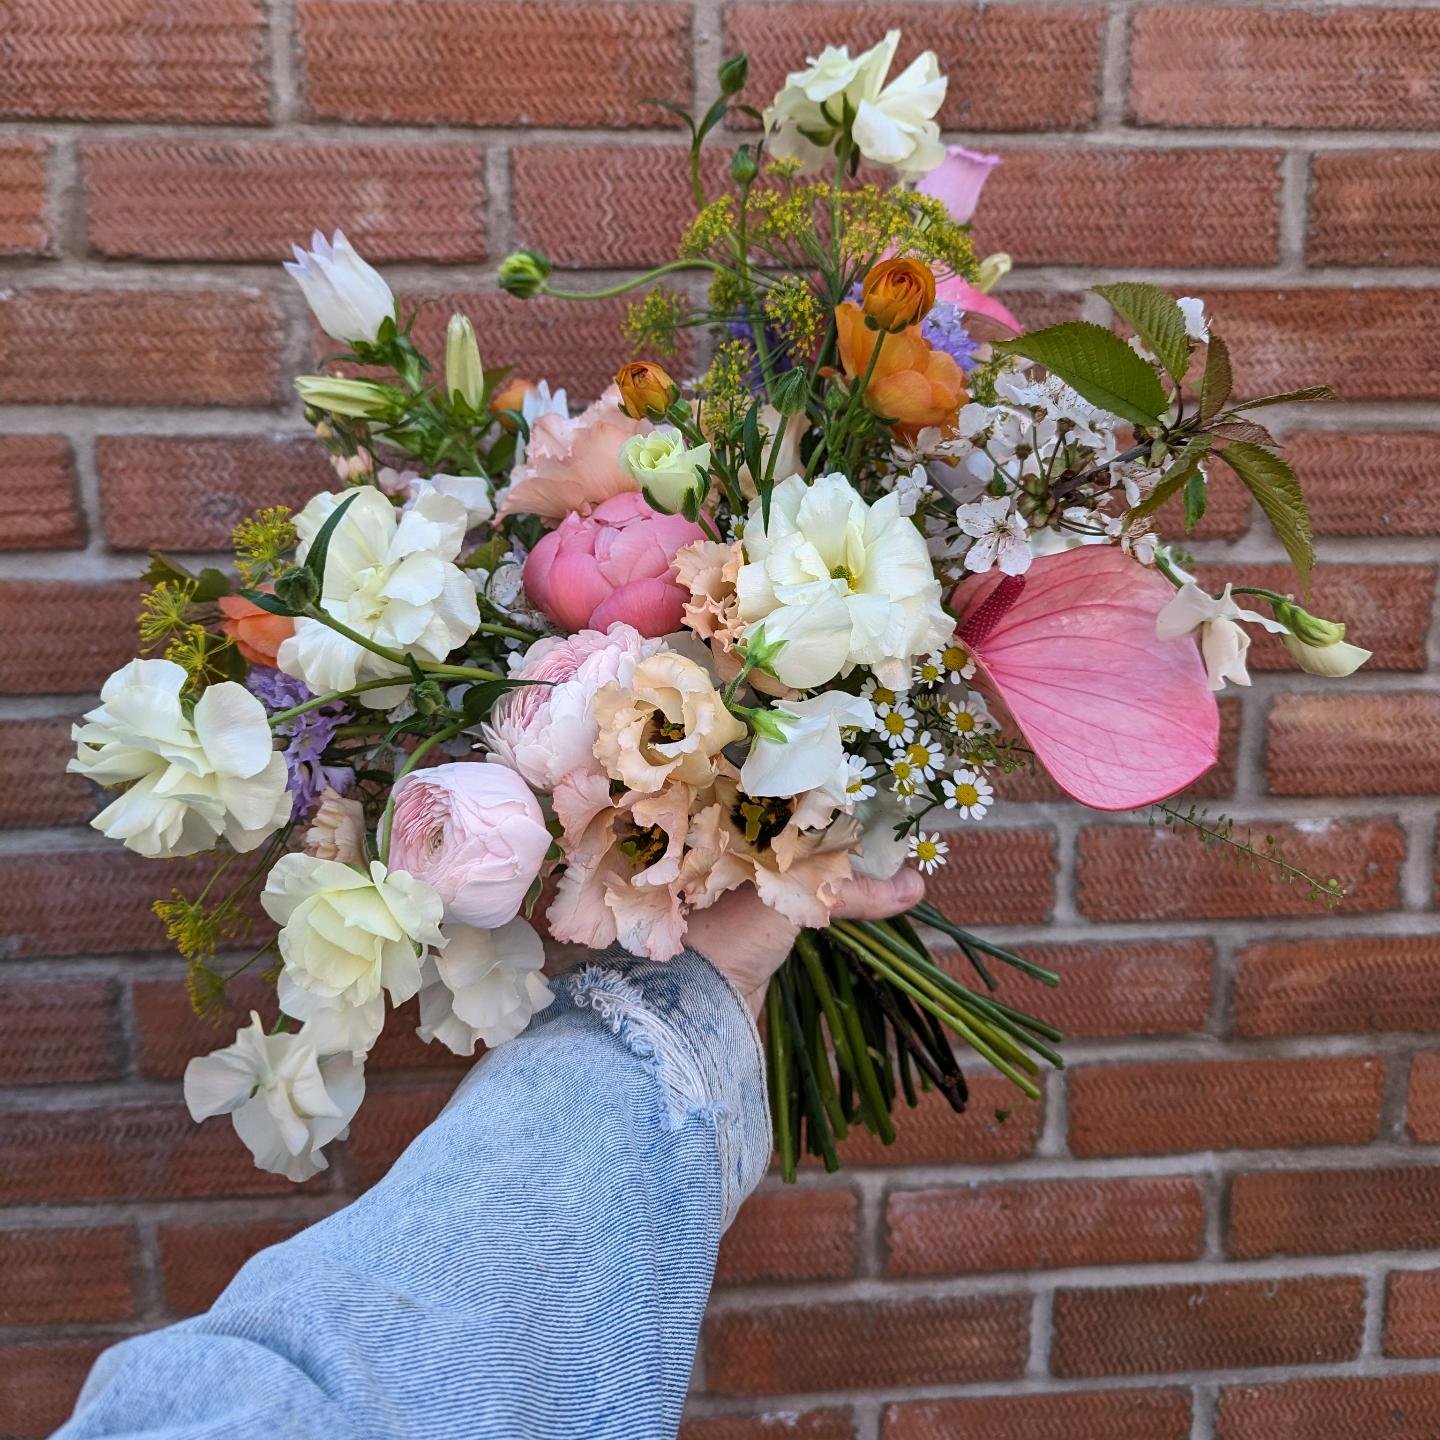 Some ruffly loose springtime blooms for Charlotte. 
.
From rambling wild flowers to perfectly curated blooms🌹🌻 Whatever your style, we've got you covered. Book a consultation with us to create something beautiful together for your wedding or event.